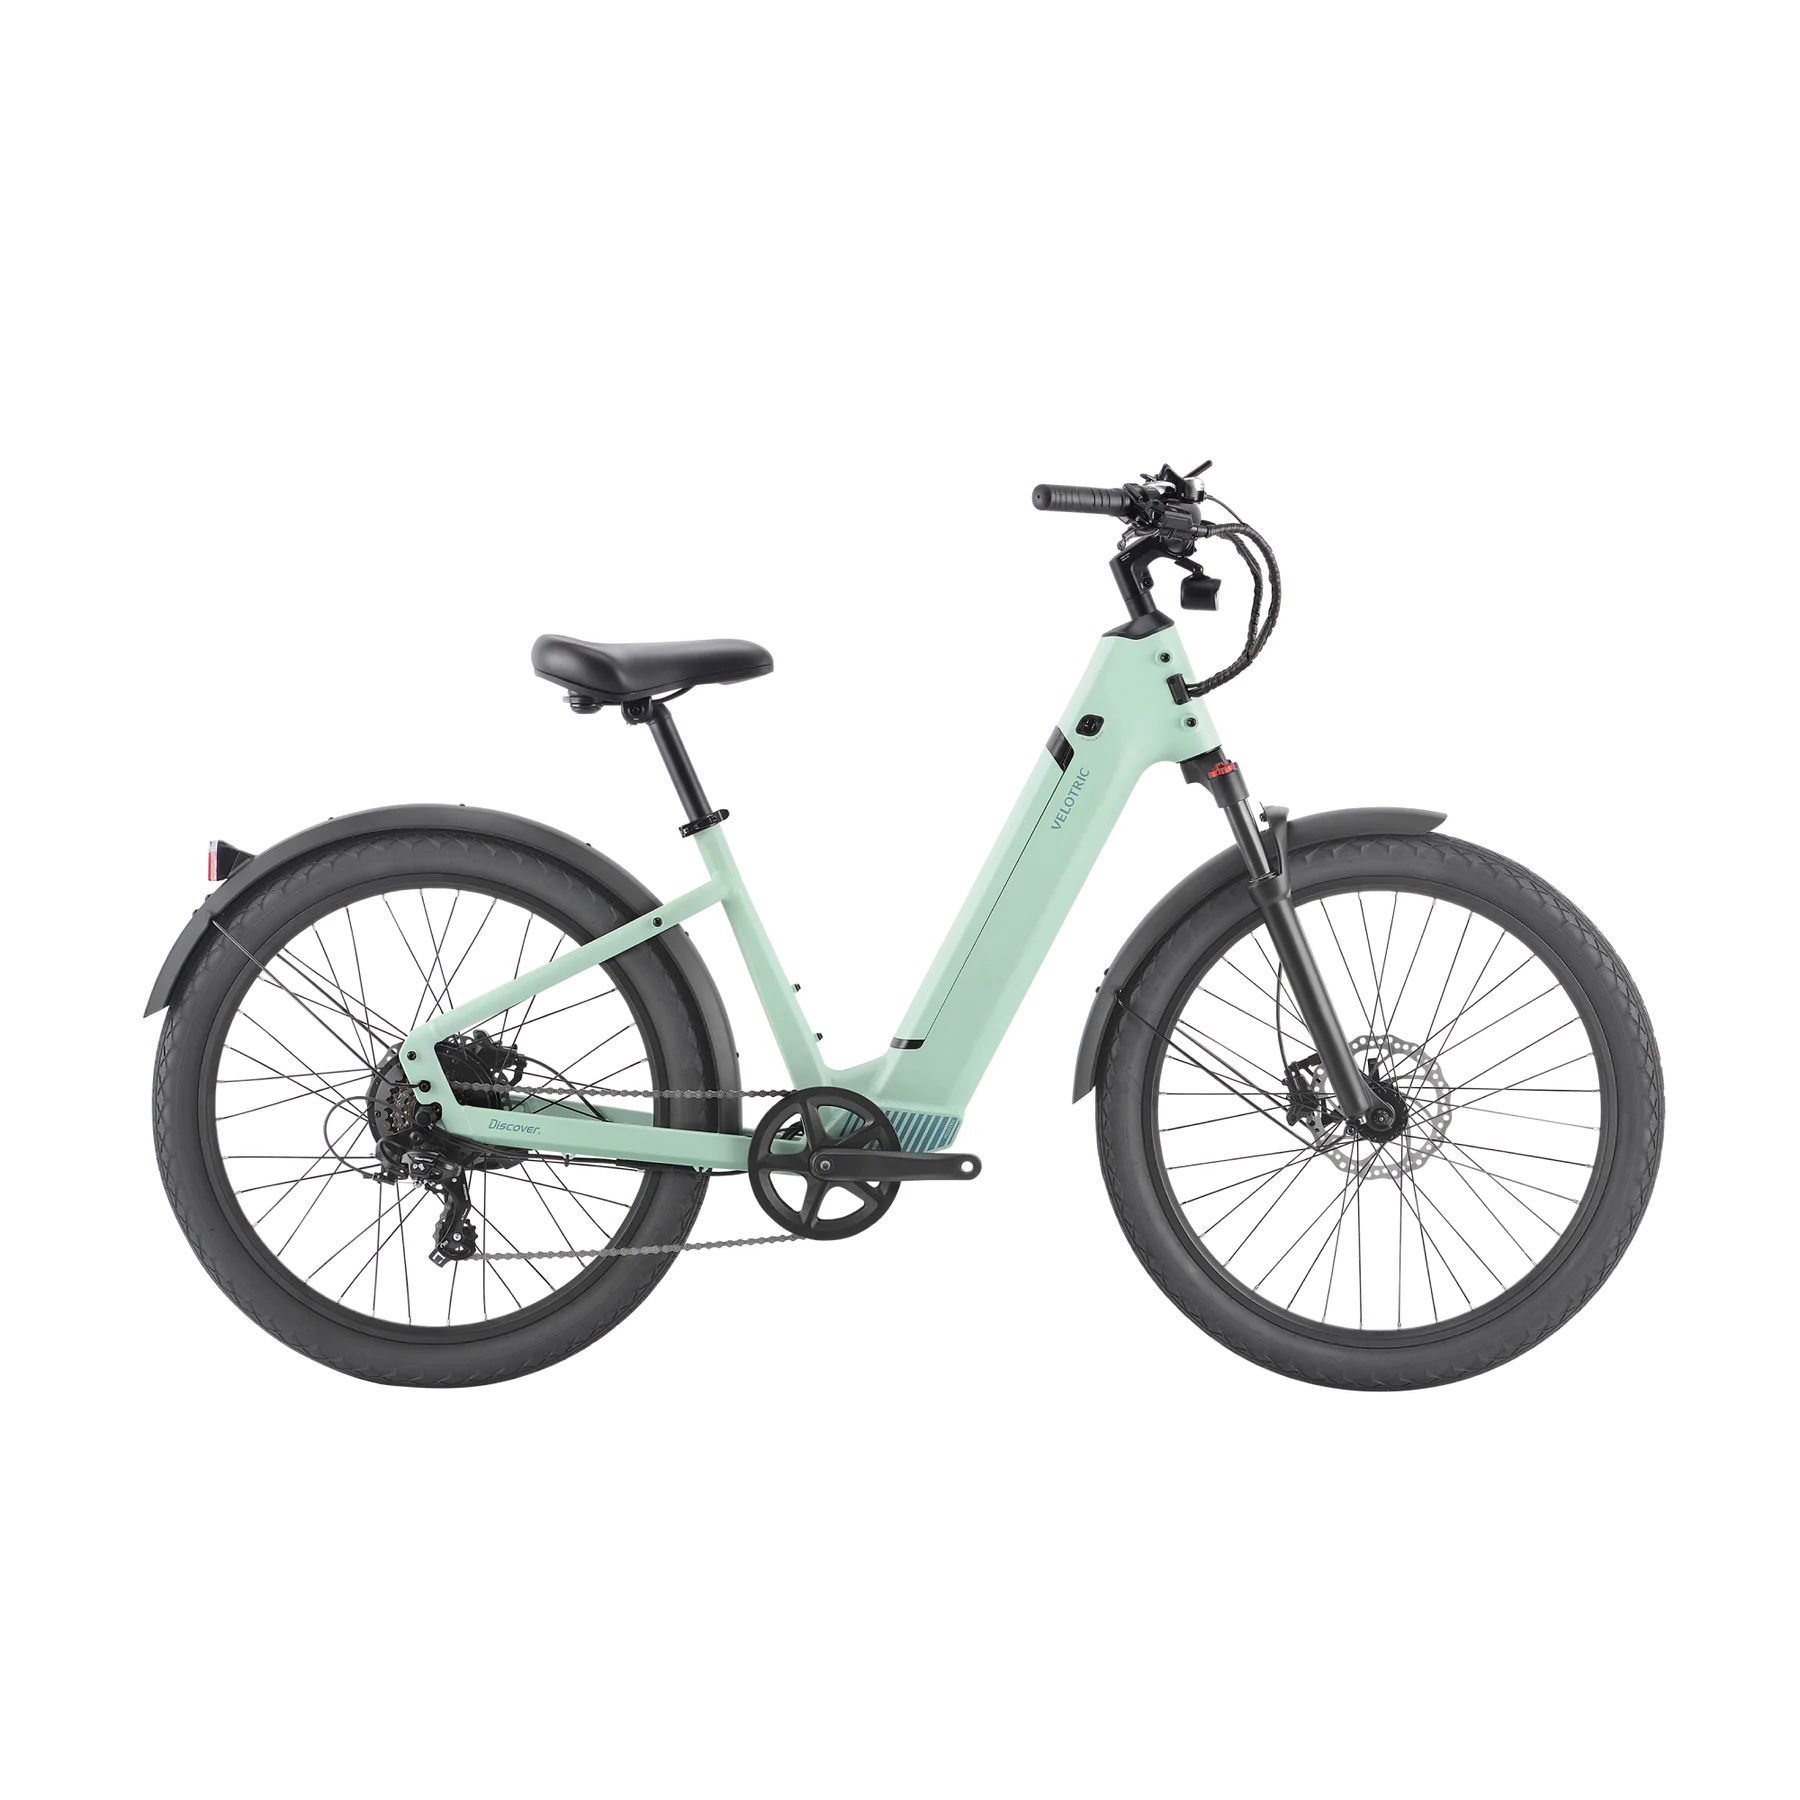 SALE:  Velotric Discover 1 – Moped style Cruiser eBike w/Throttle